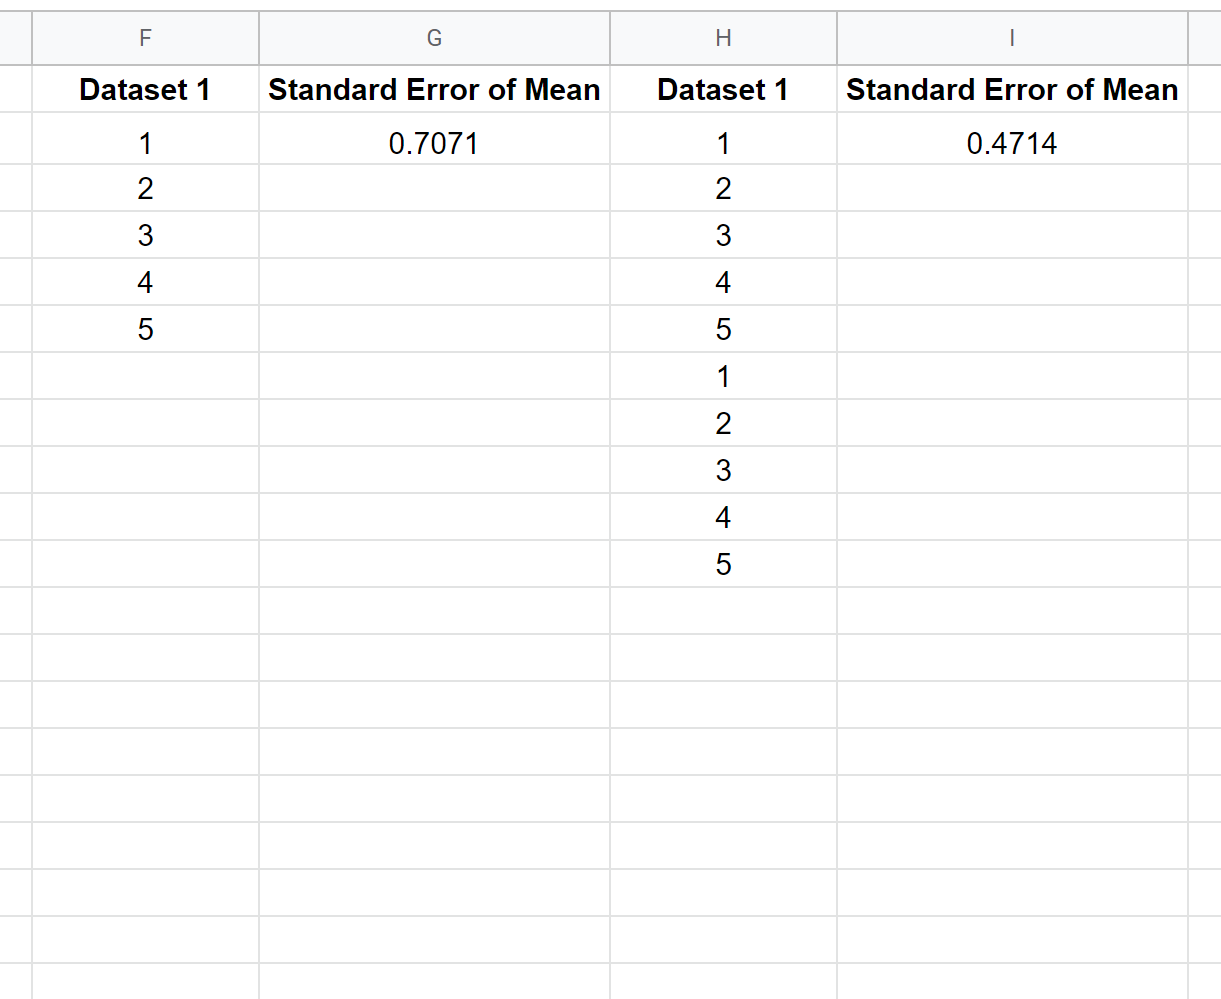 Comparing two standard errors in Google Sheets